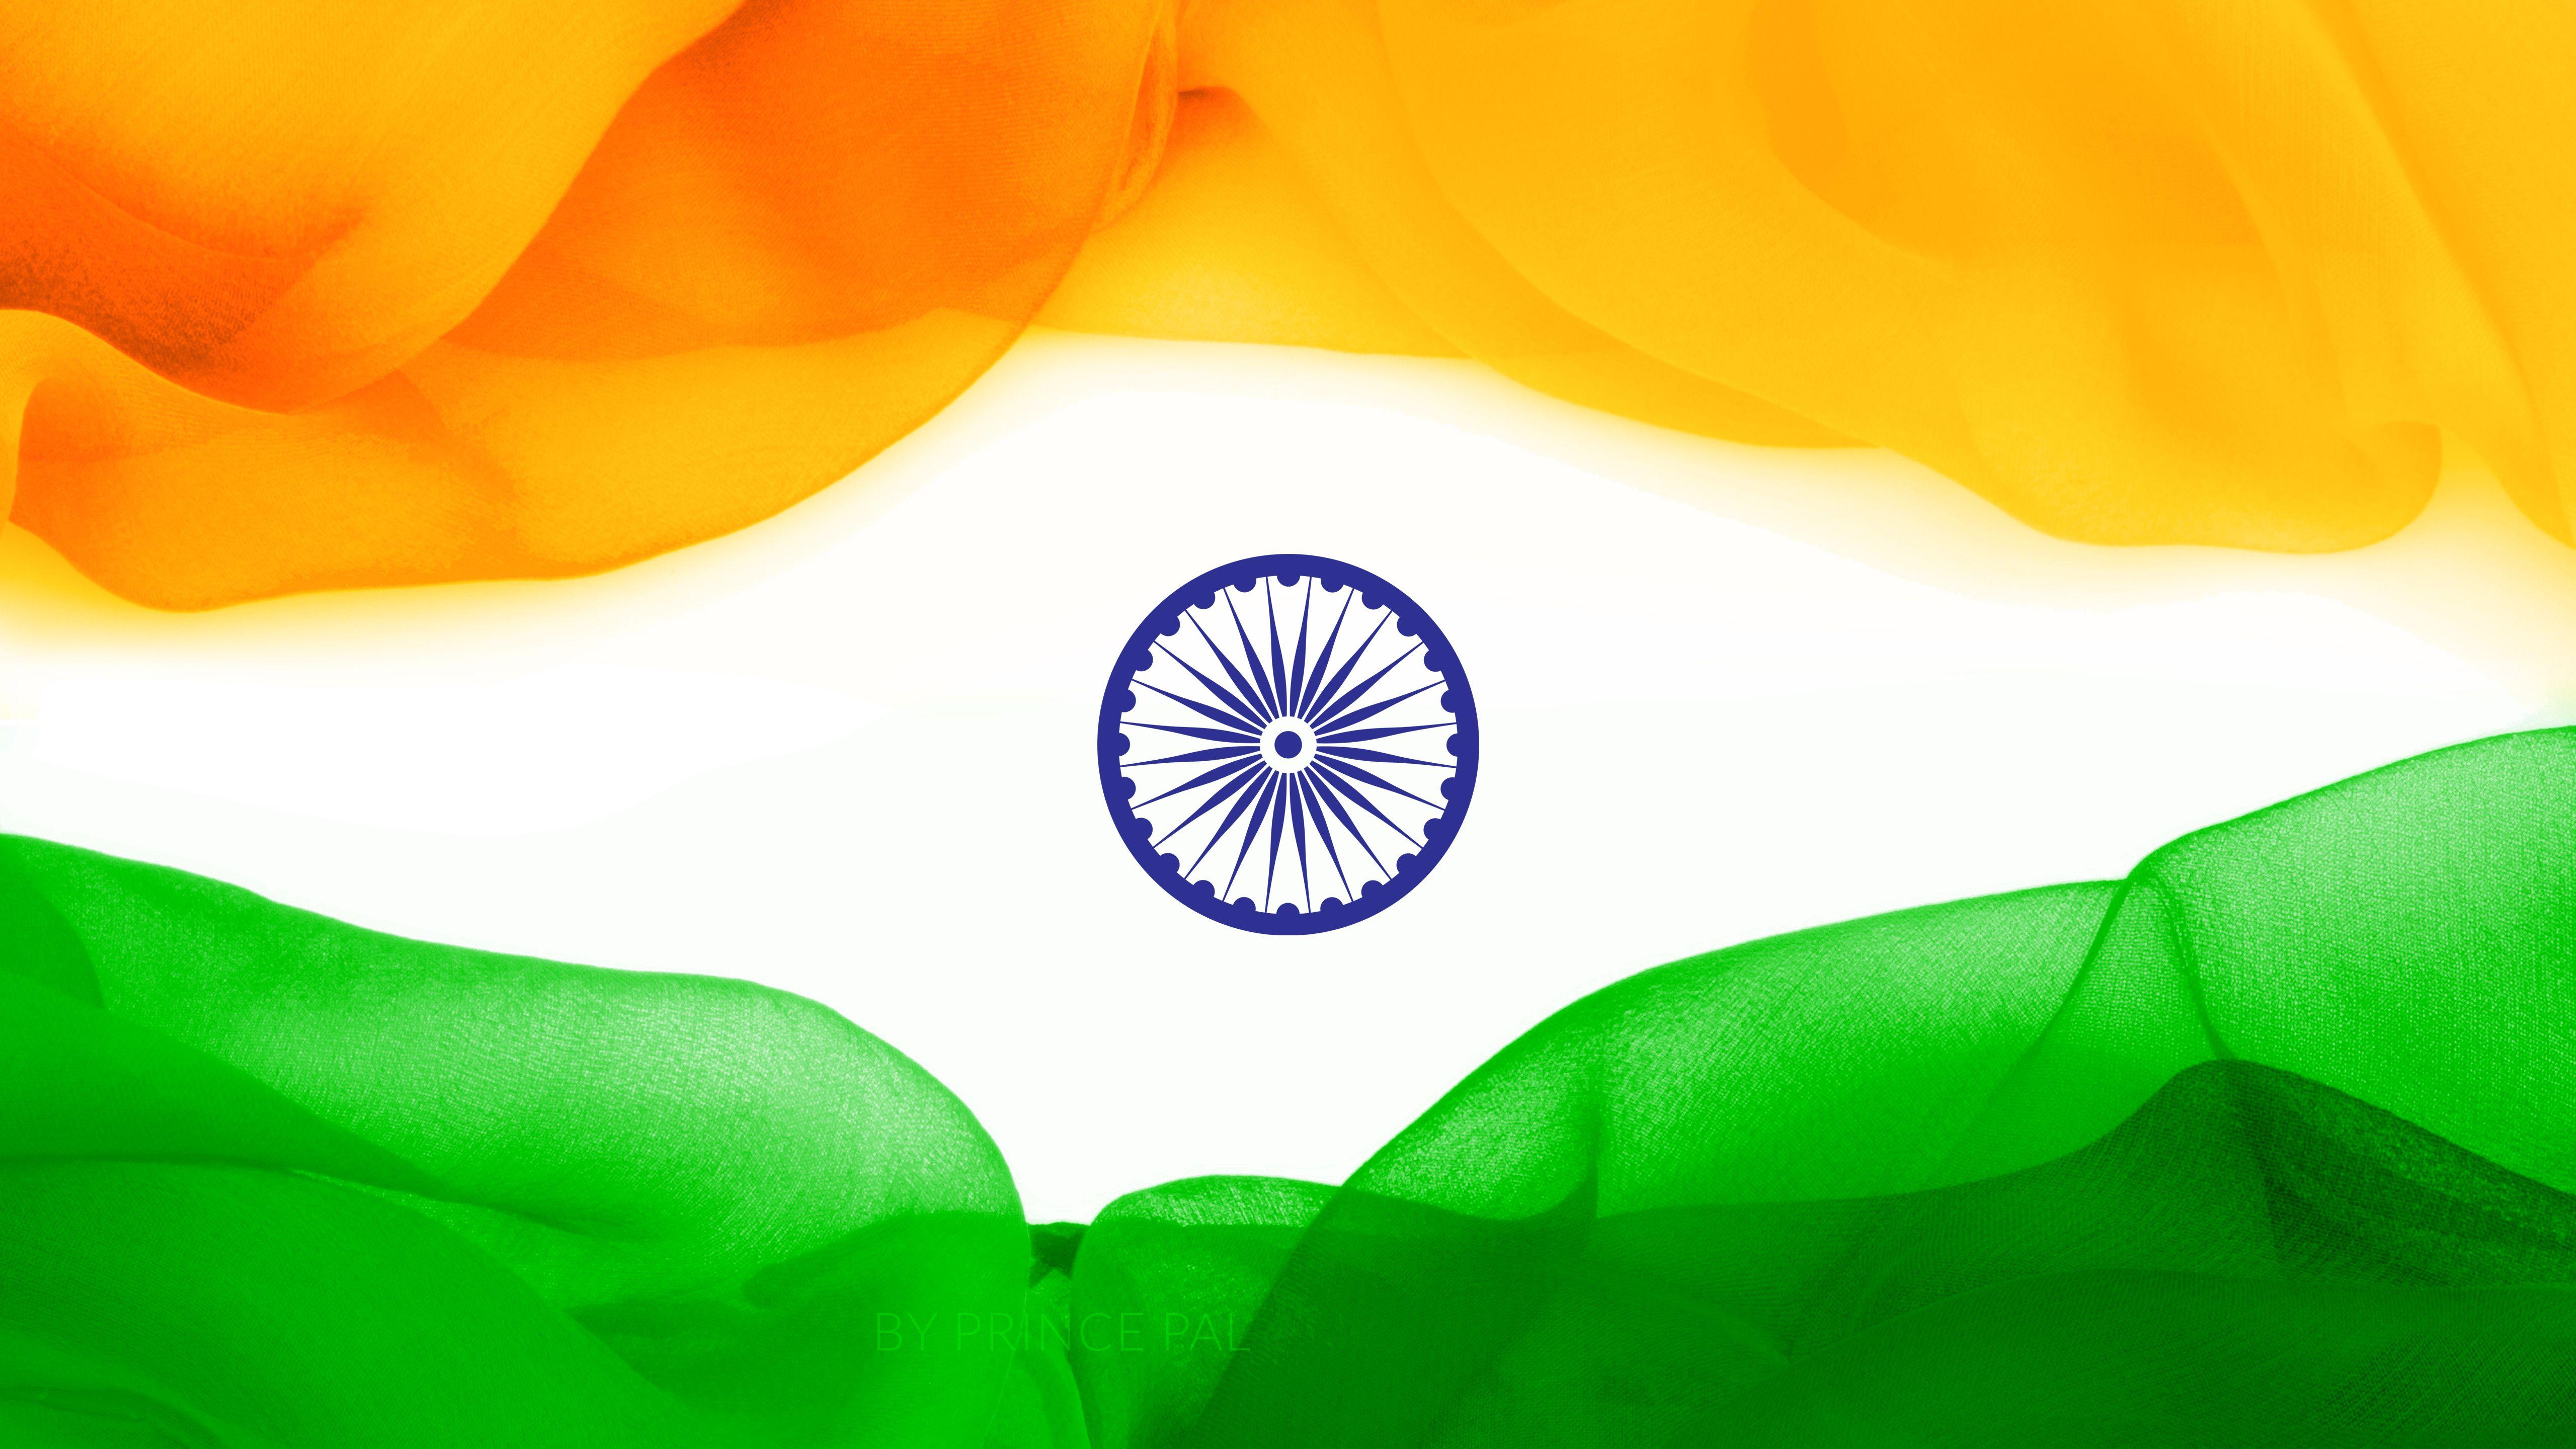 Beautiful Indian National Flag Wallpapers - Wallpaper Cave